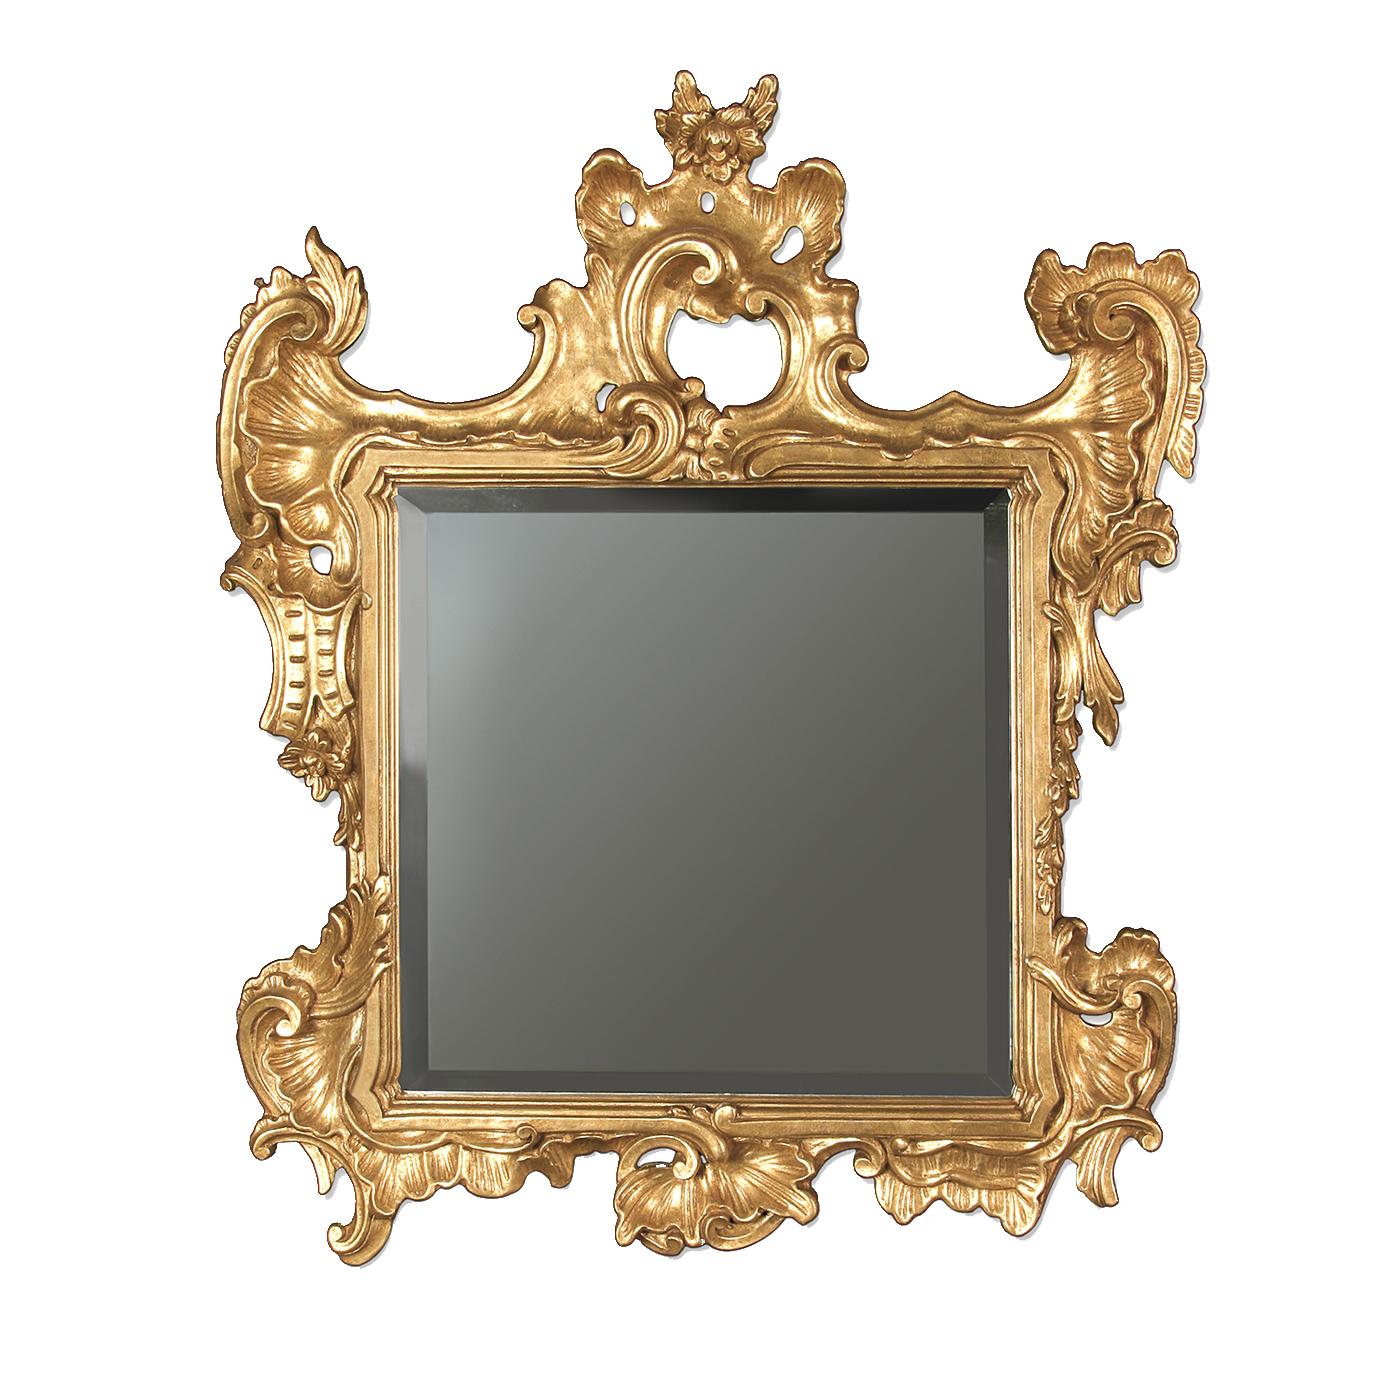 A magnificent example of the centuries-old tradition of Italian wood carving, the frame of this square mirror will adorn with effortless sophistication a classic home. The complex coils of this piece were carved by hand in wood and finished with a